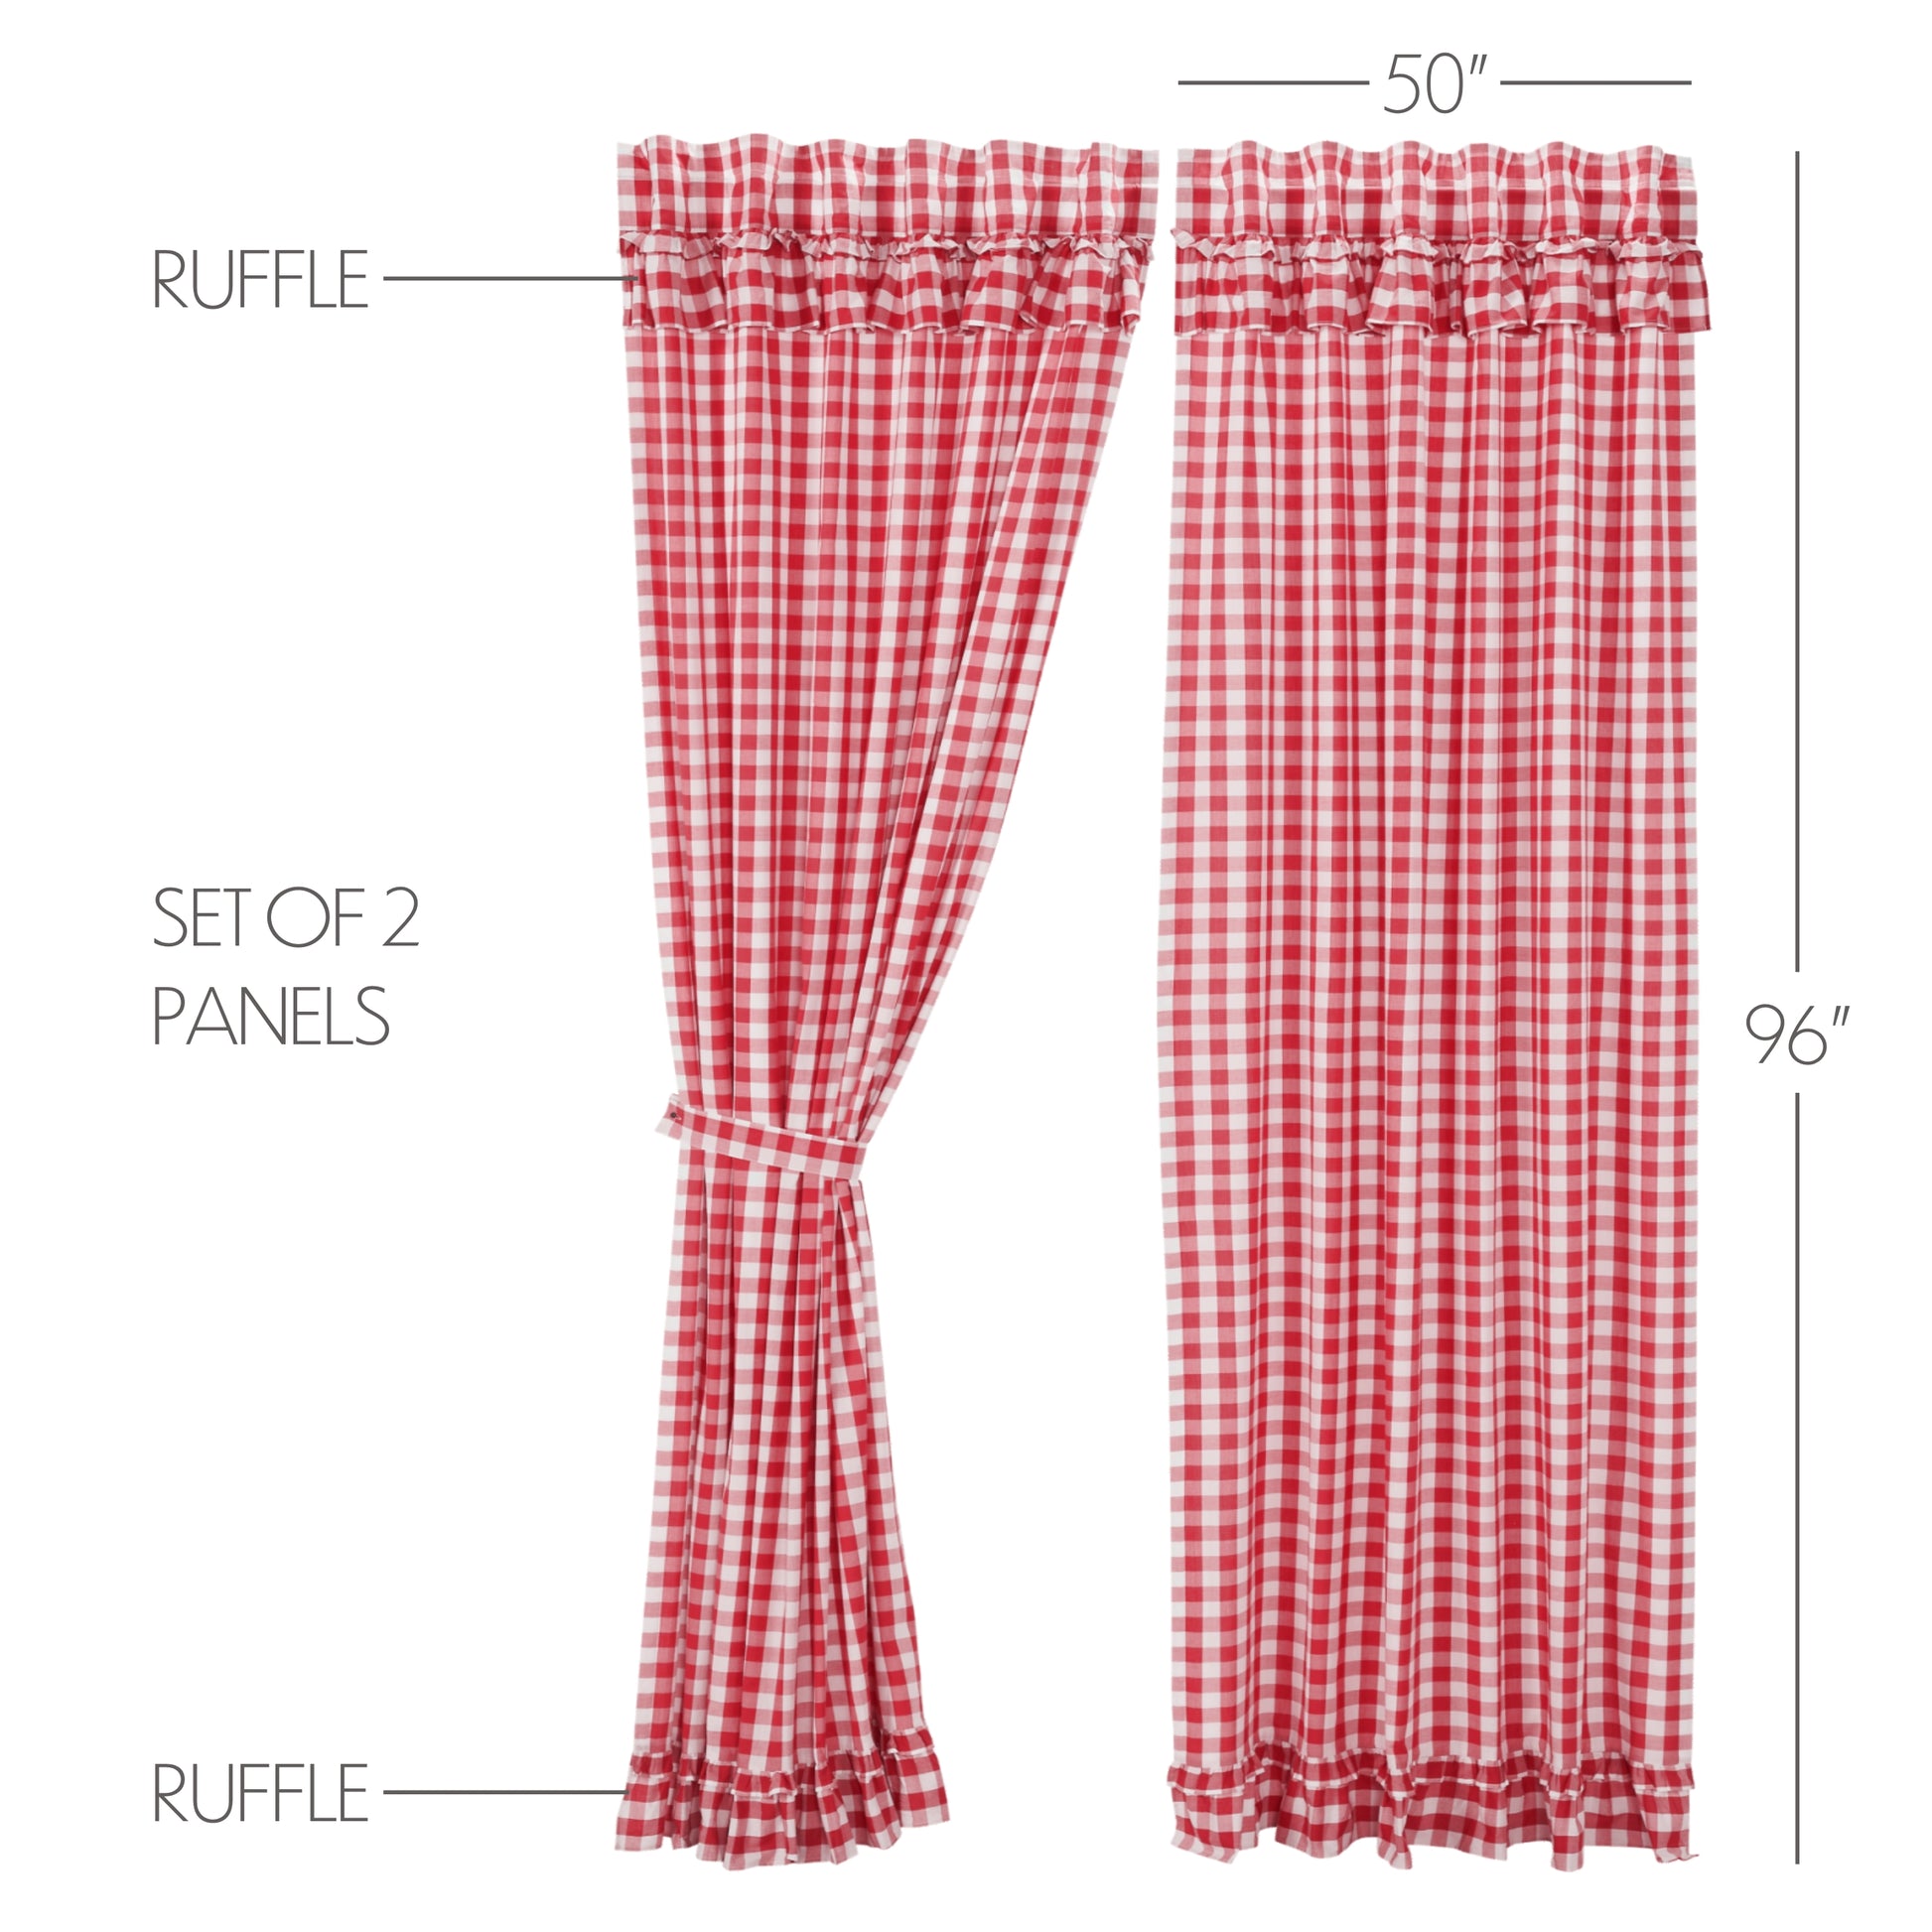 81488-Annie-Buffalo-Red-Check-Ruffled-Panel-Set-of-2-96x50-image-1